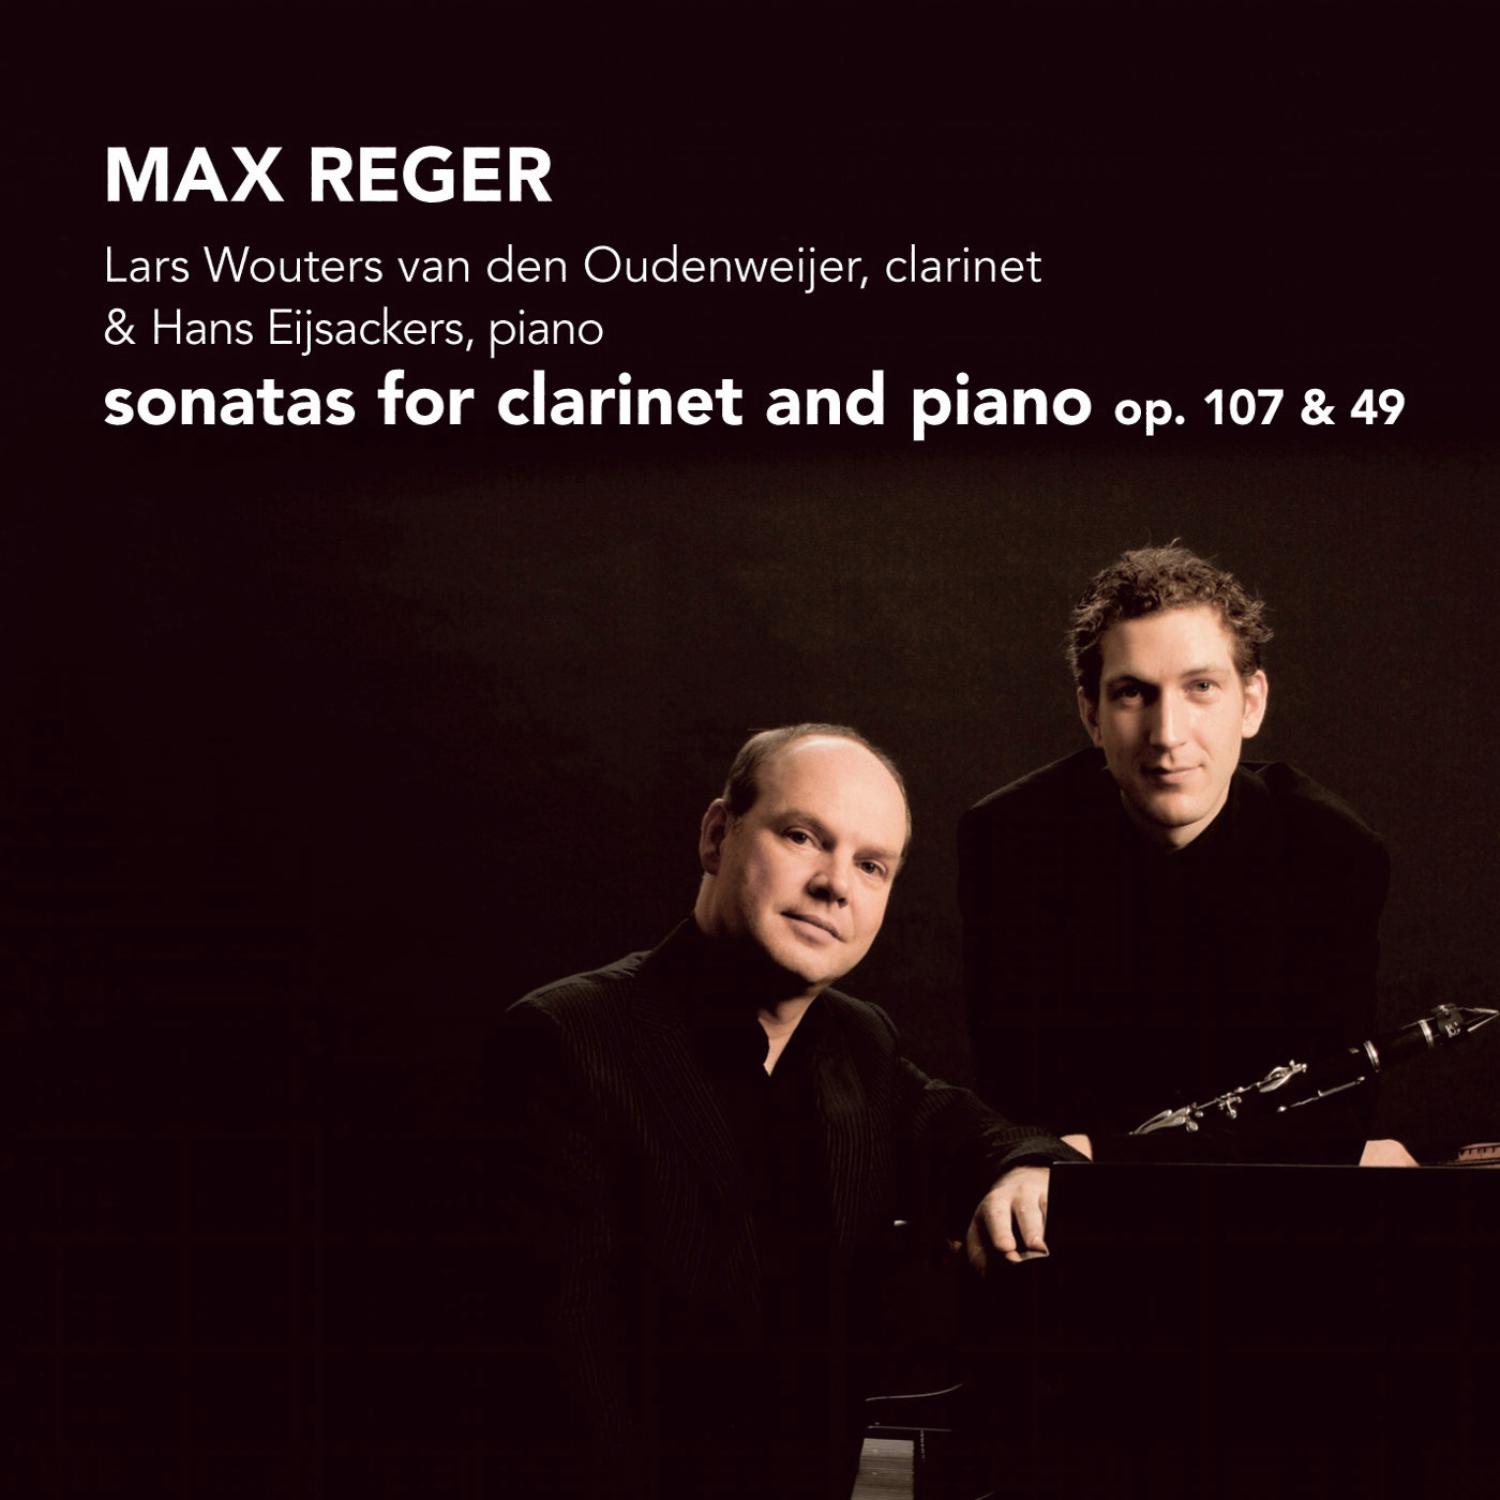 Reger: Sonatas for Clarinet and Piano, Op. 107 & 49